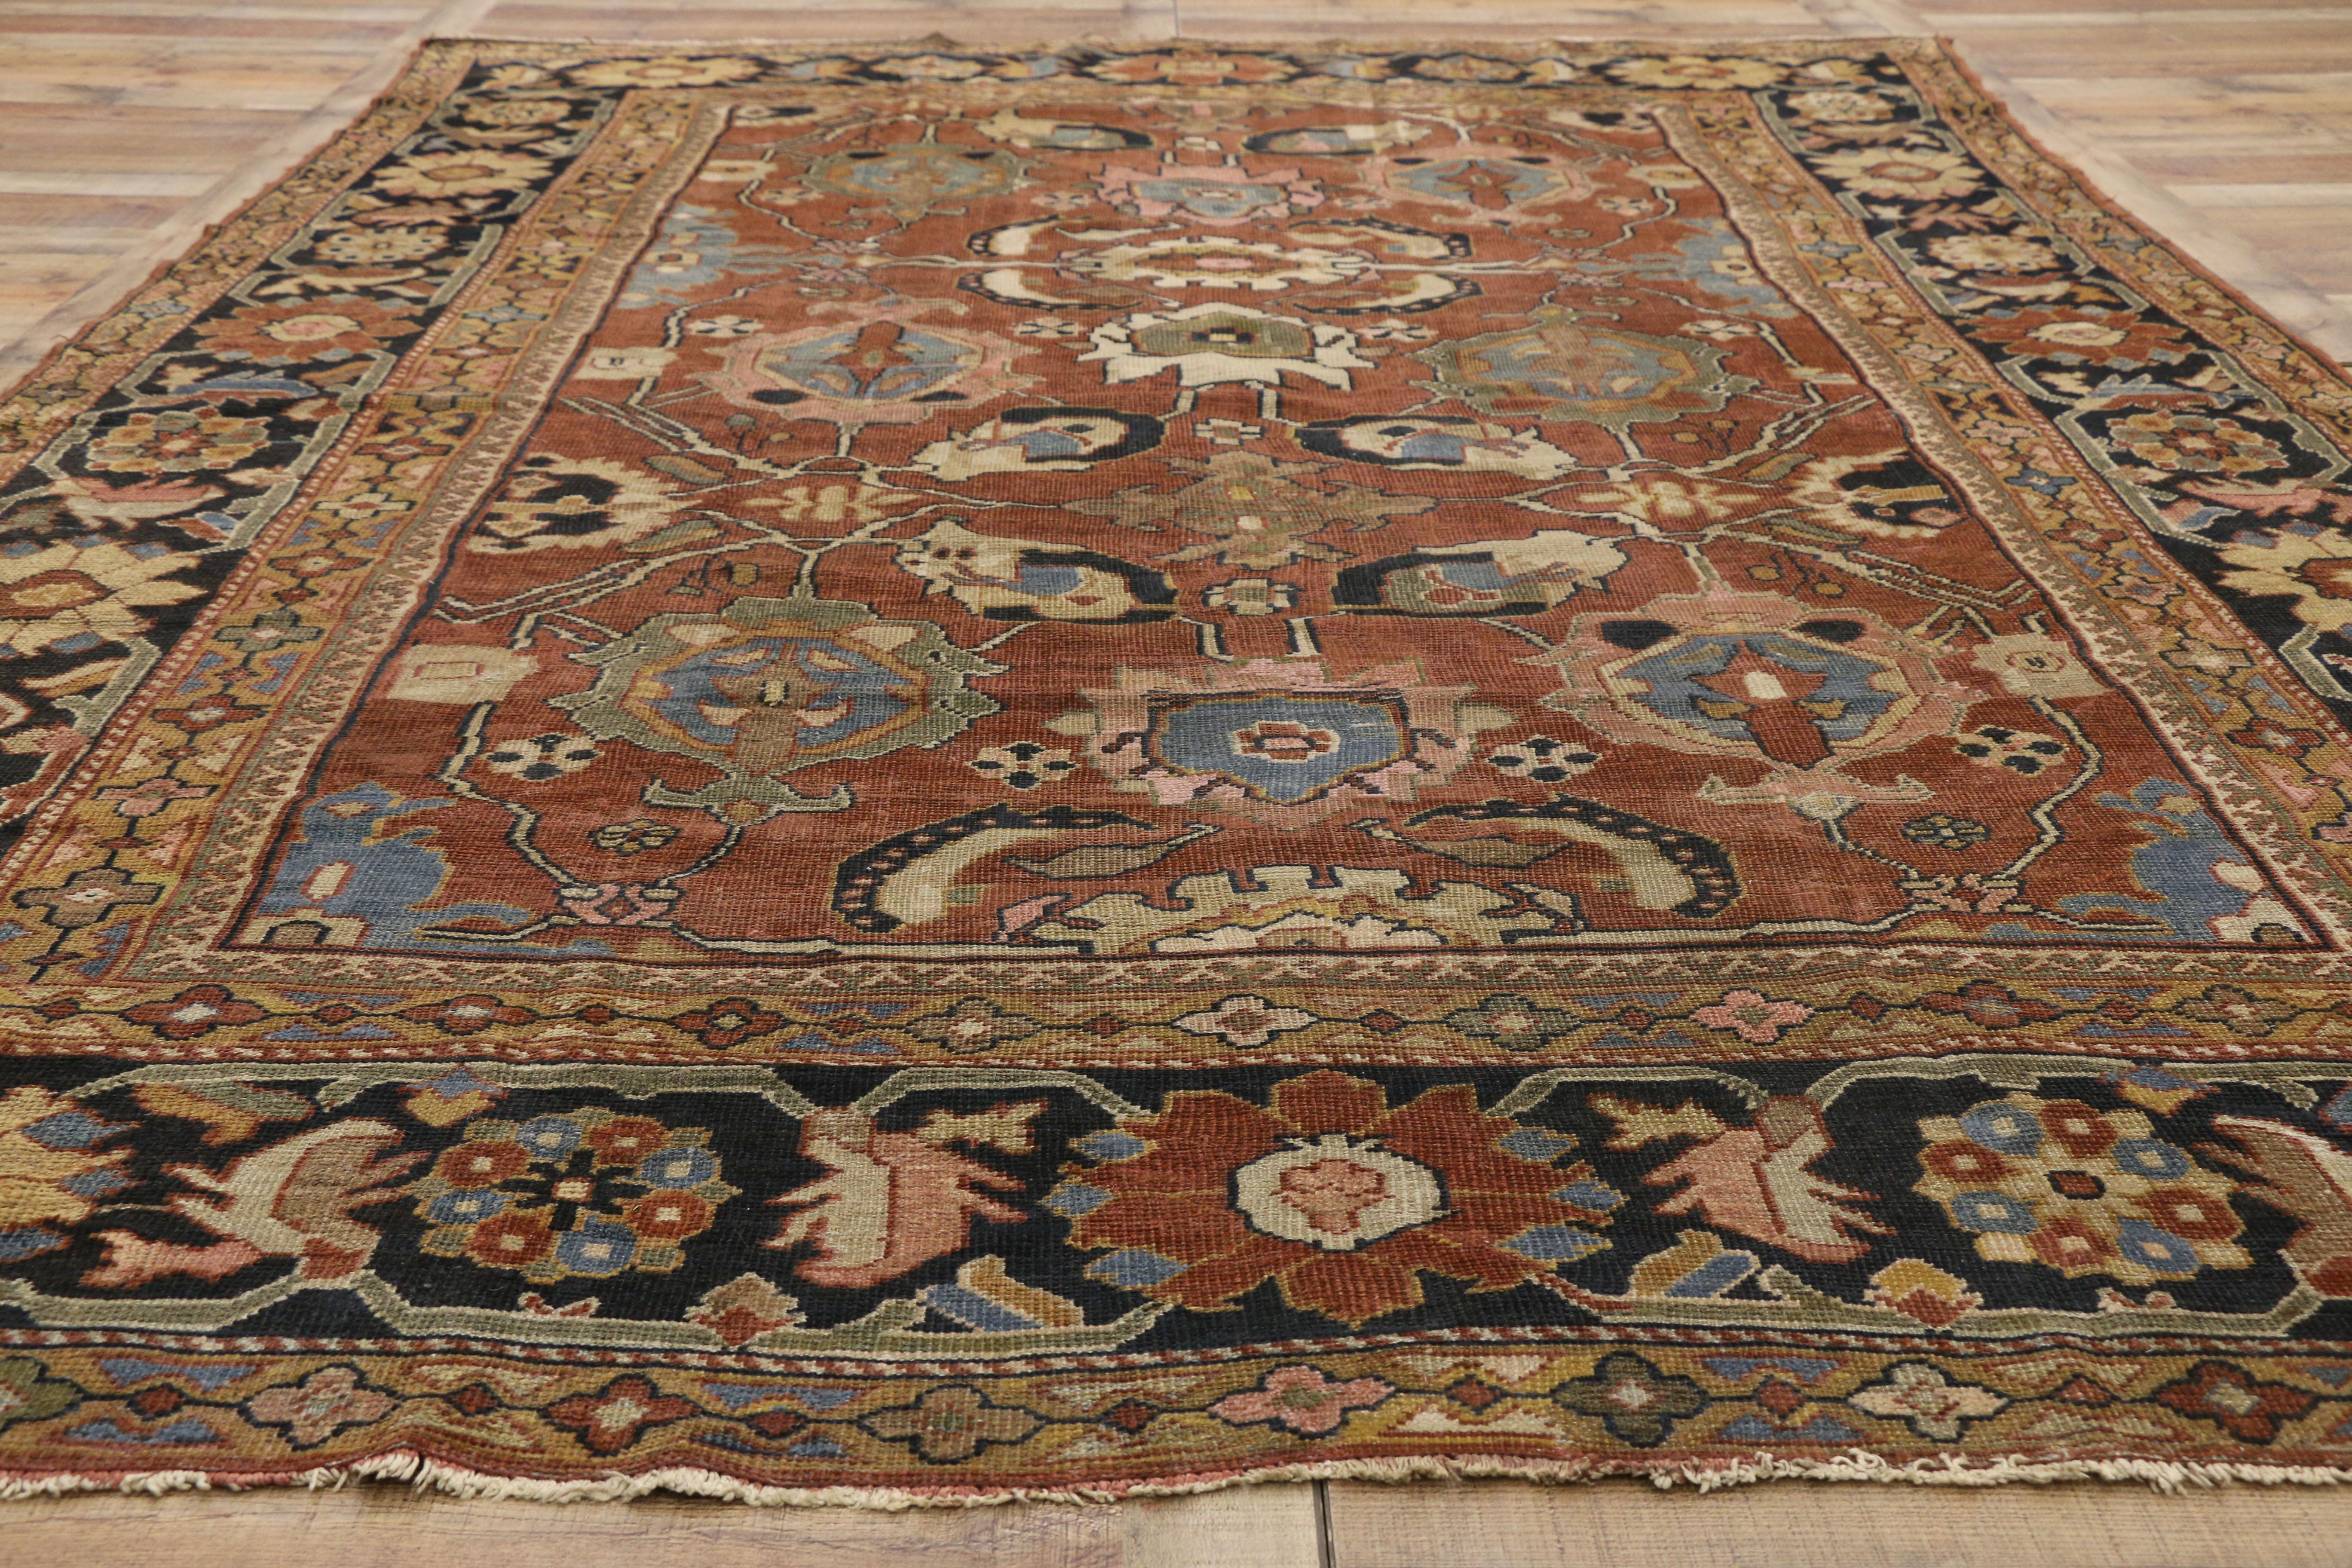 19th Century Antique Persian Sultanabad Rug with Arts & Crafts Style